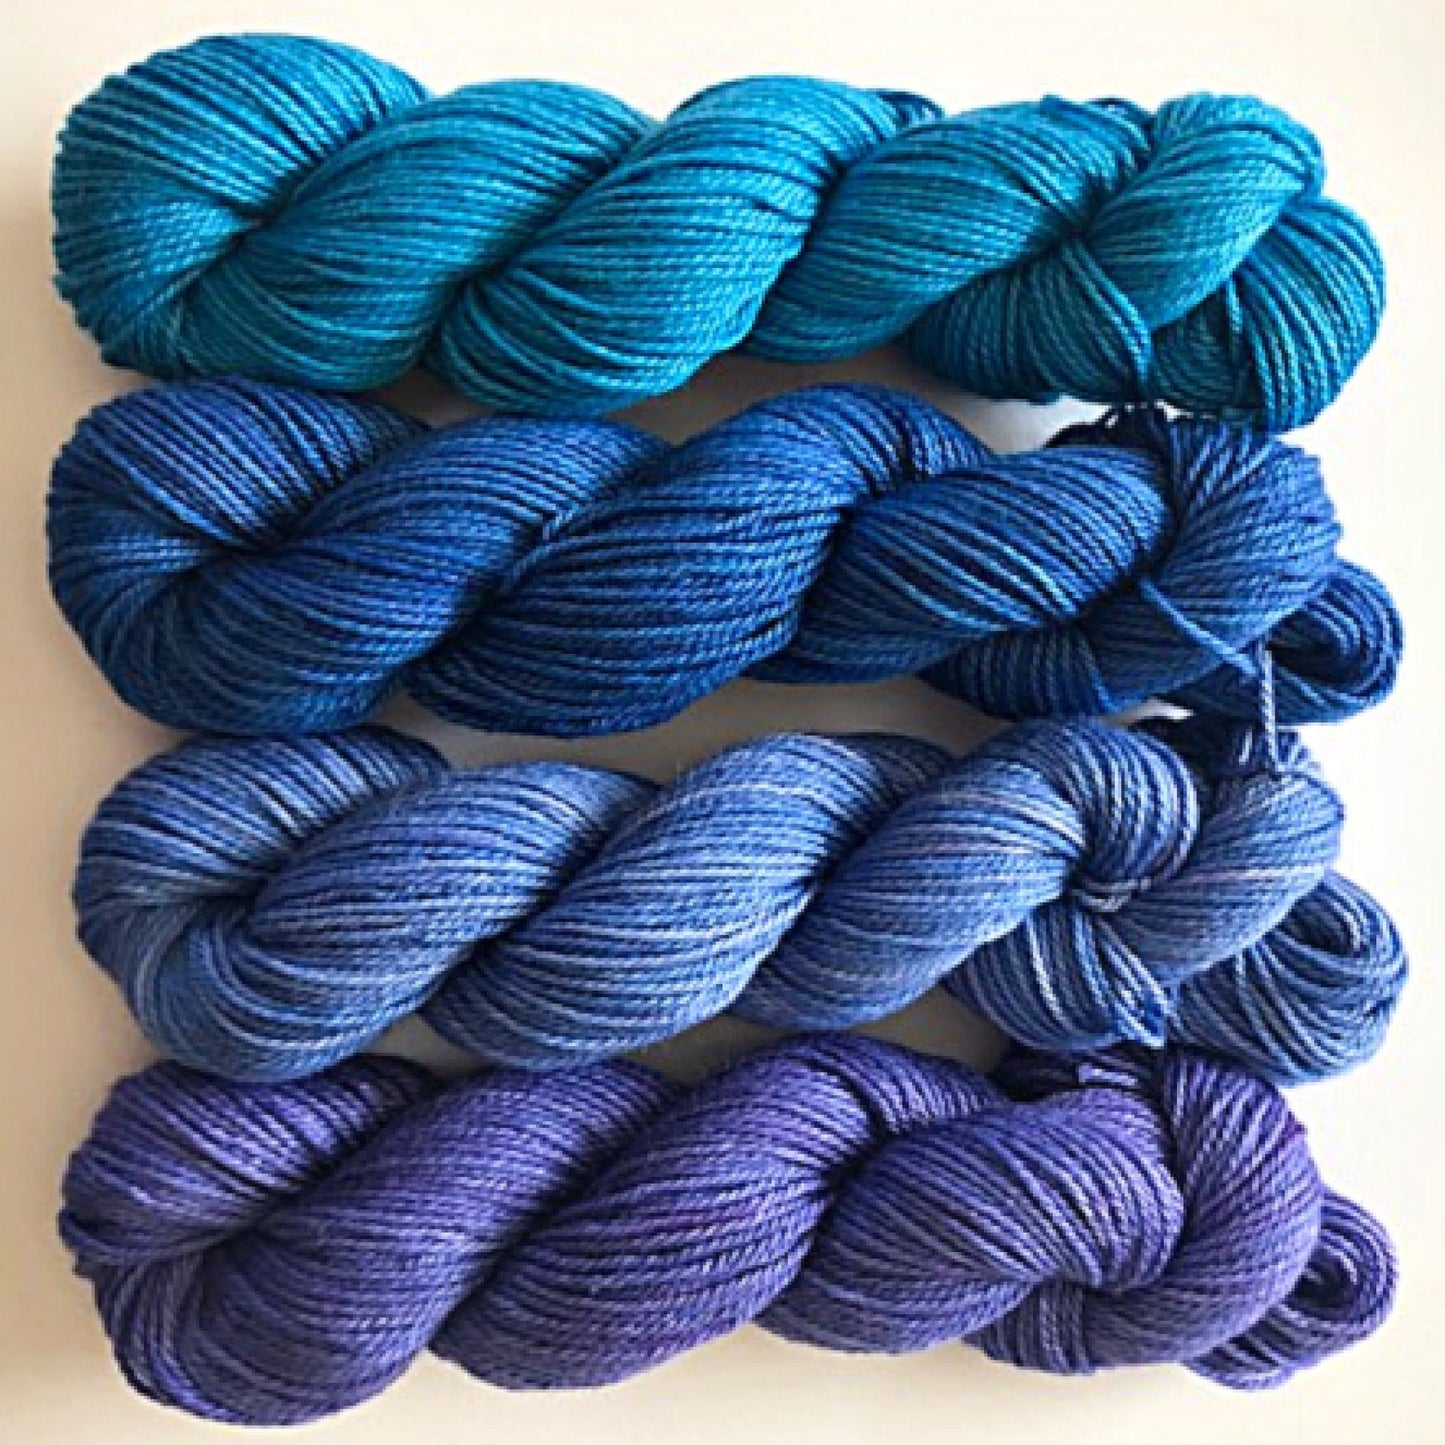 Vegan Sock / Fingering Yarn - Hand Dyed Bamboo Cotton - Choose Color & Skein Size - Blue and Purple Semi Solids - Artisan 3 Ply Tonal Yarn